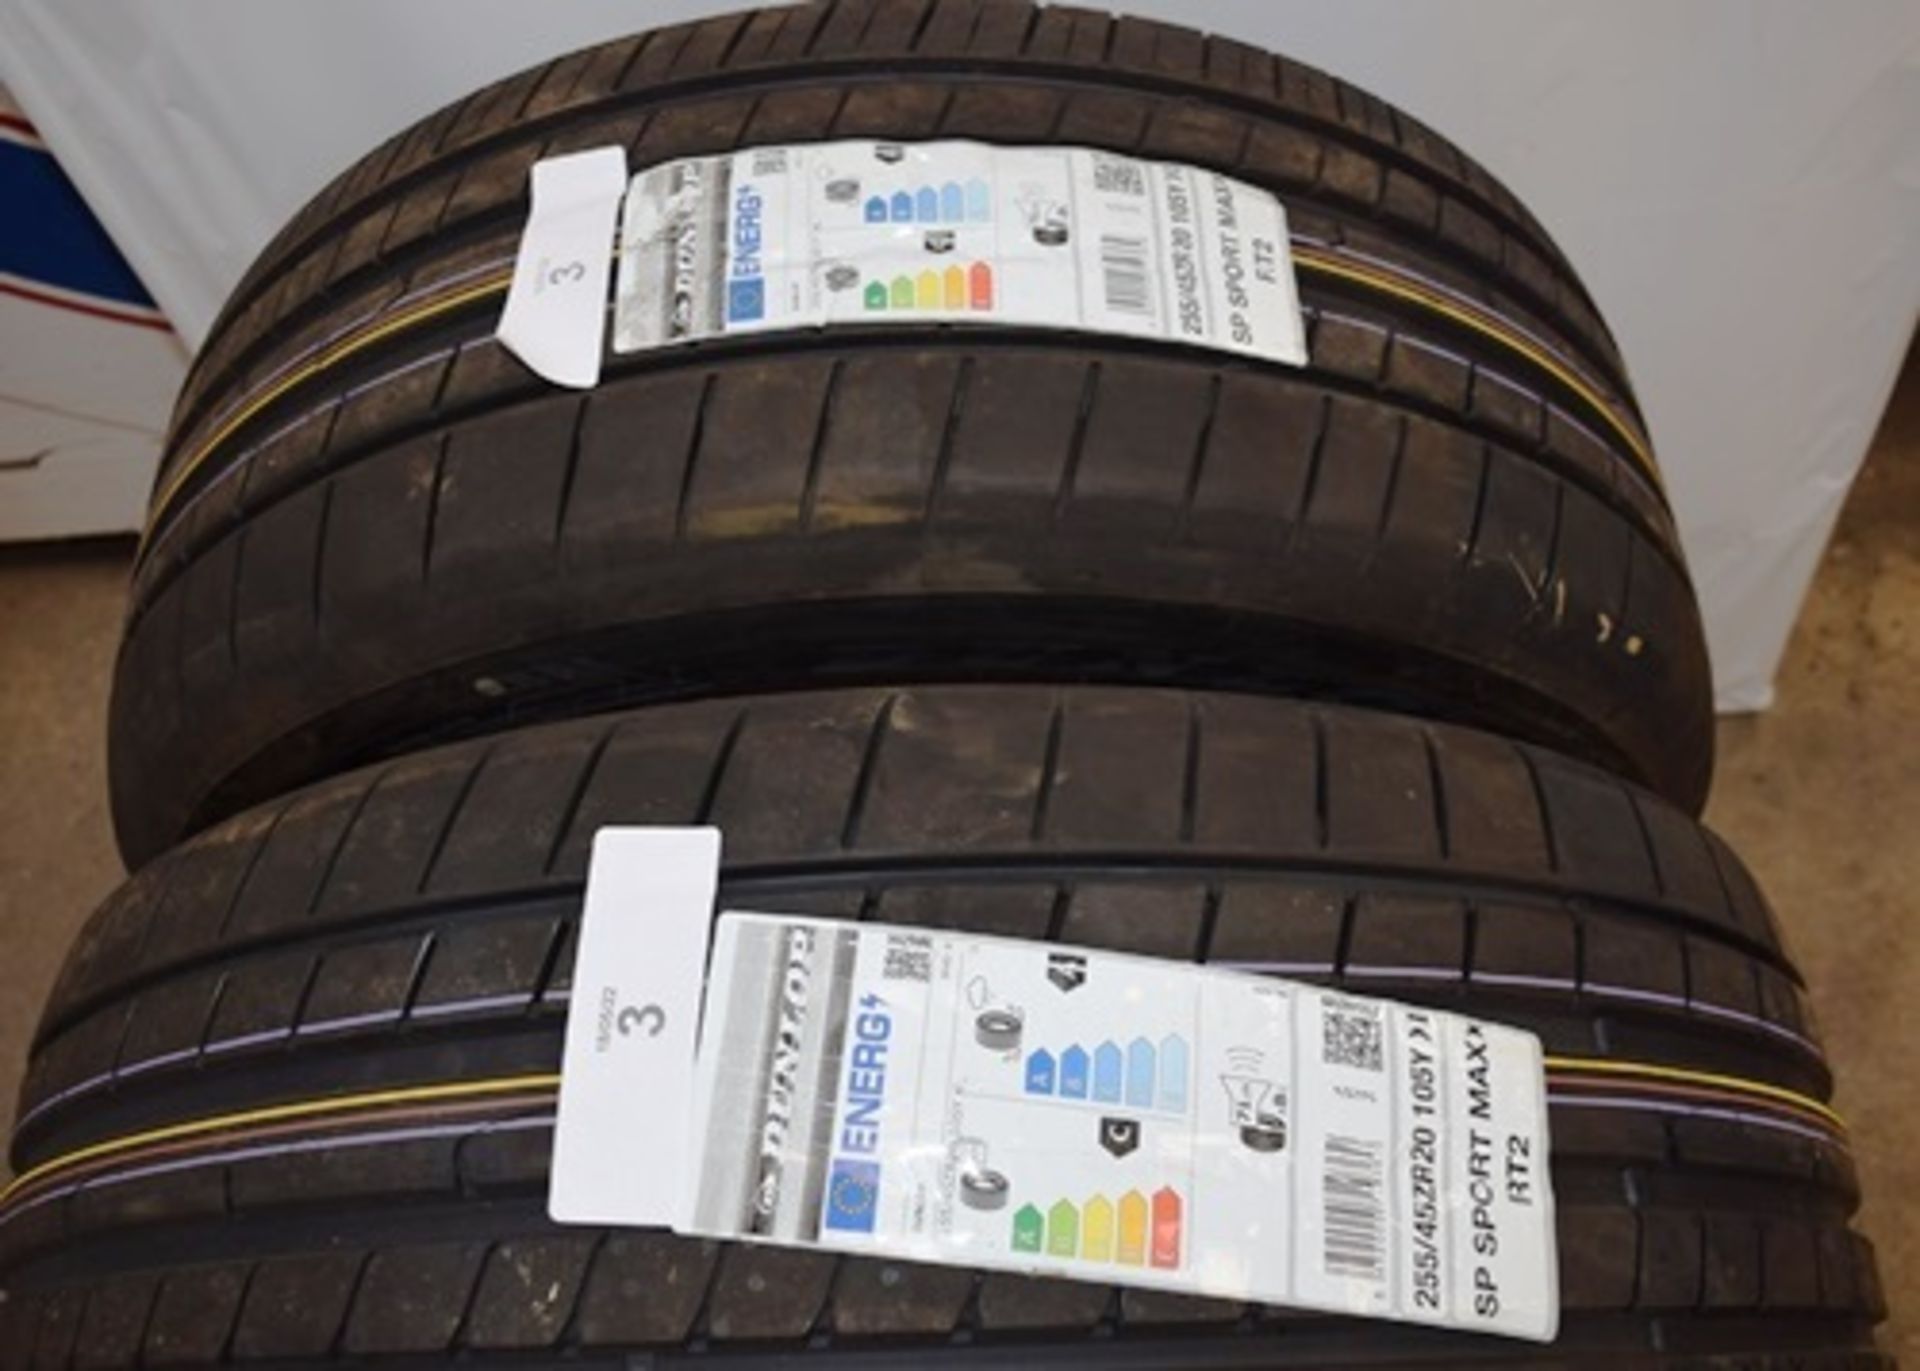 1 x pair of Dunlop SP Sport Maxx RT2 tyres, size 255/45ZR20 105Y XL - New with label (GS1)